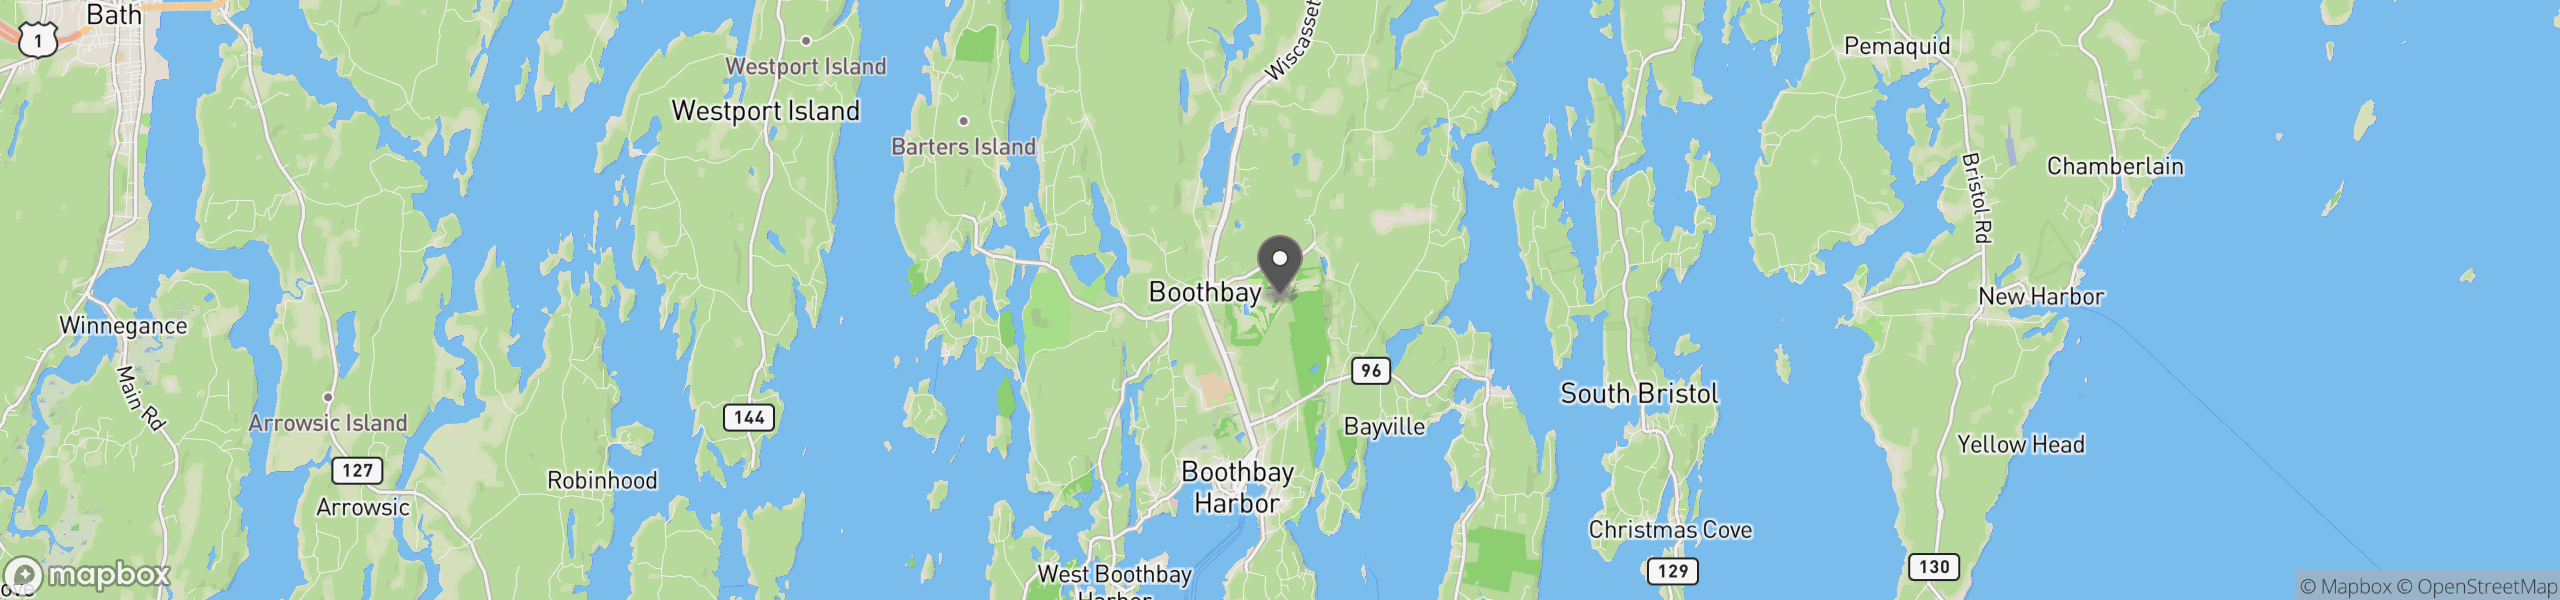 Boothbay, ME 04537